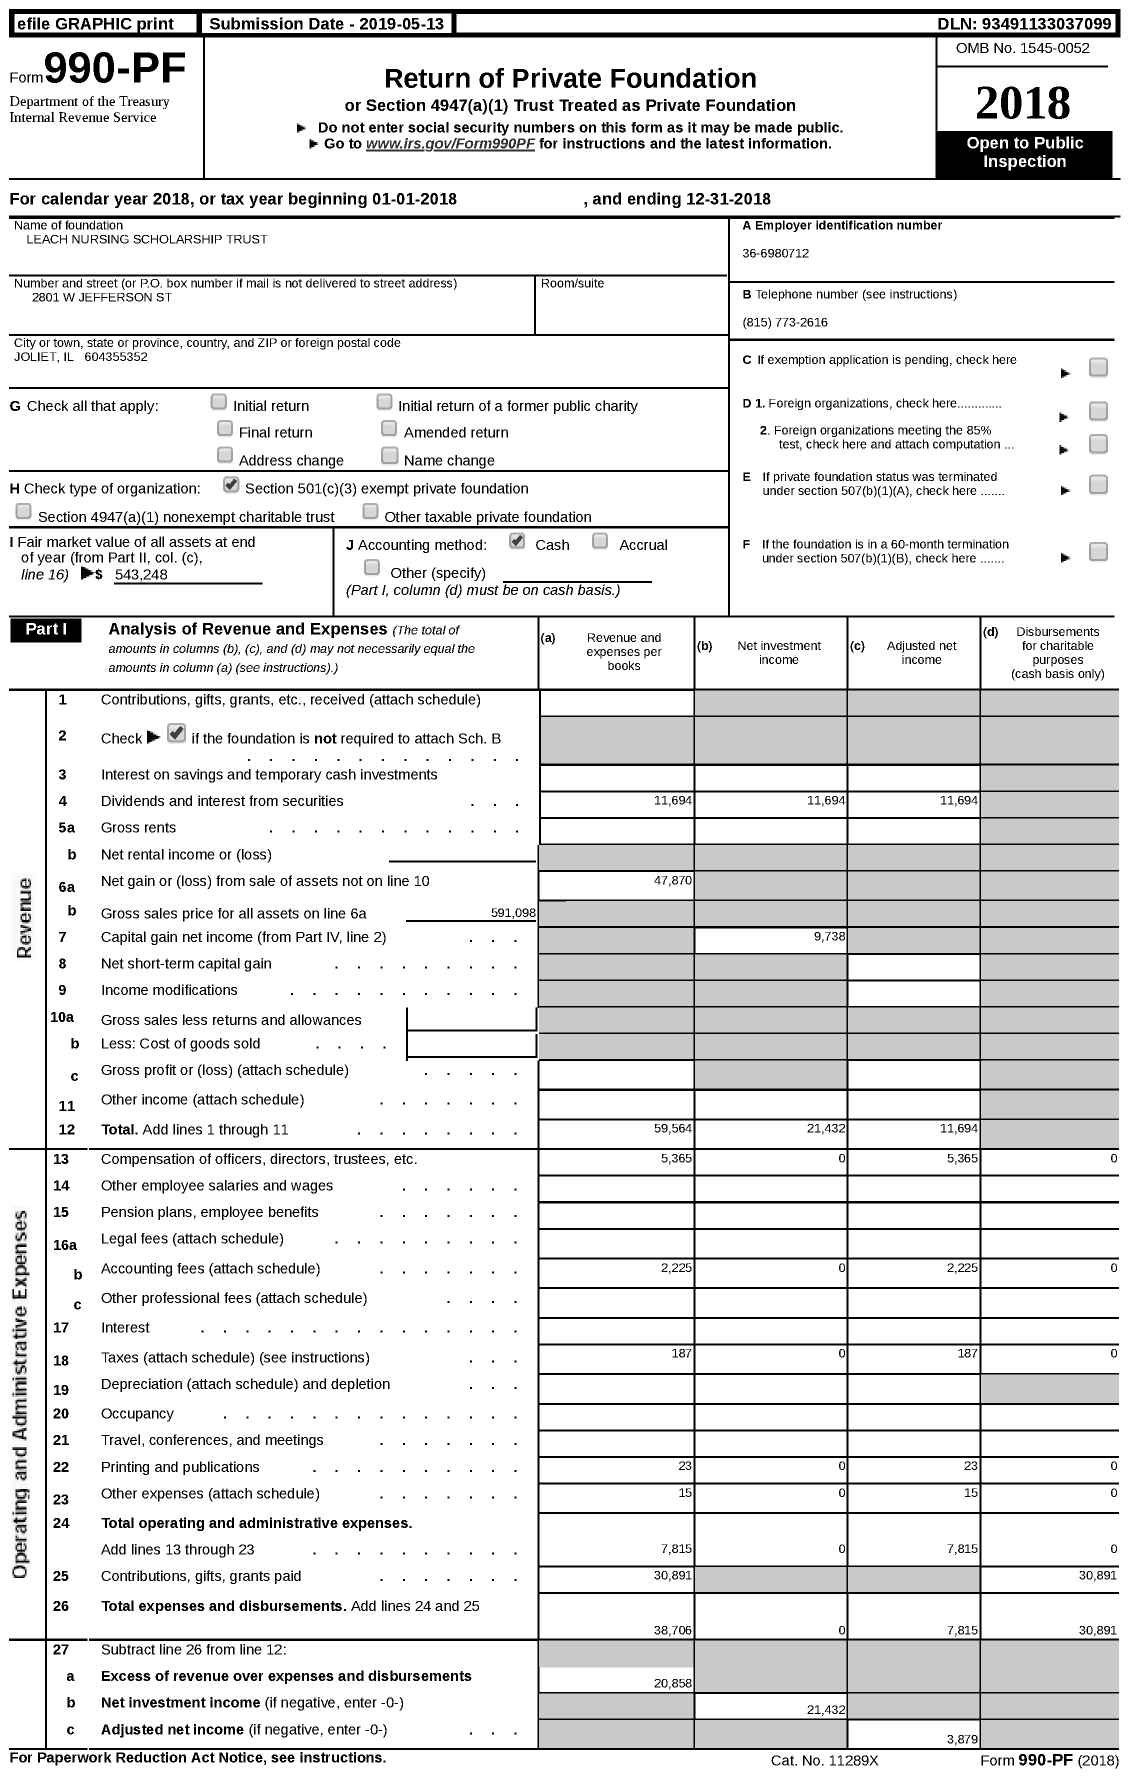 Image of first page of 2018 Form 990PF for Leach Nursing Scholarship Trust